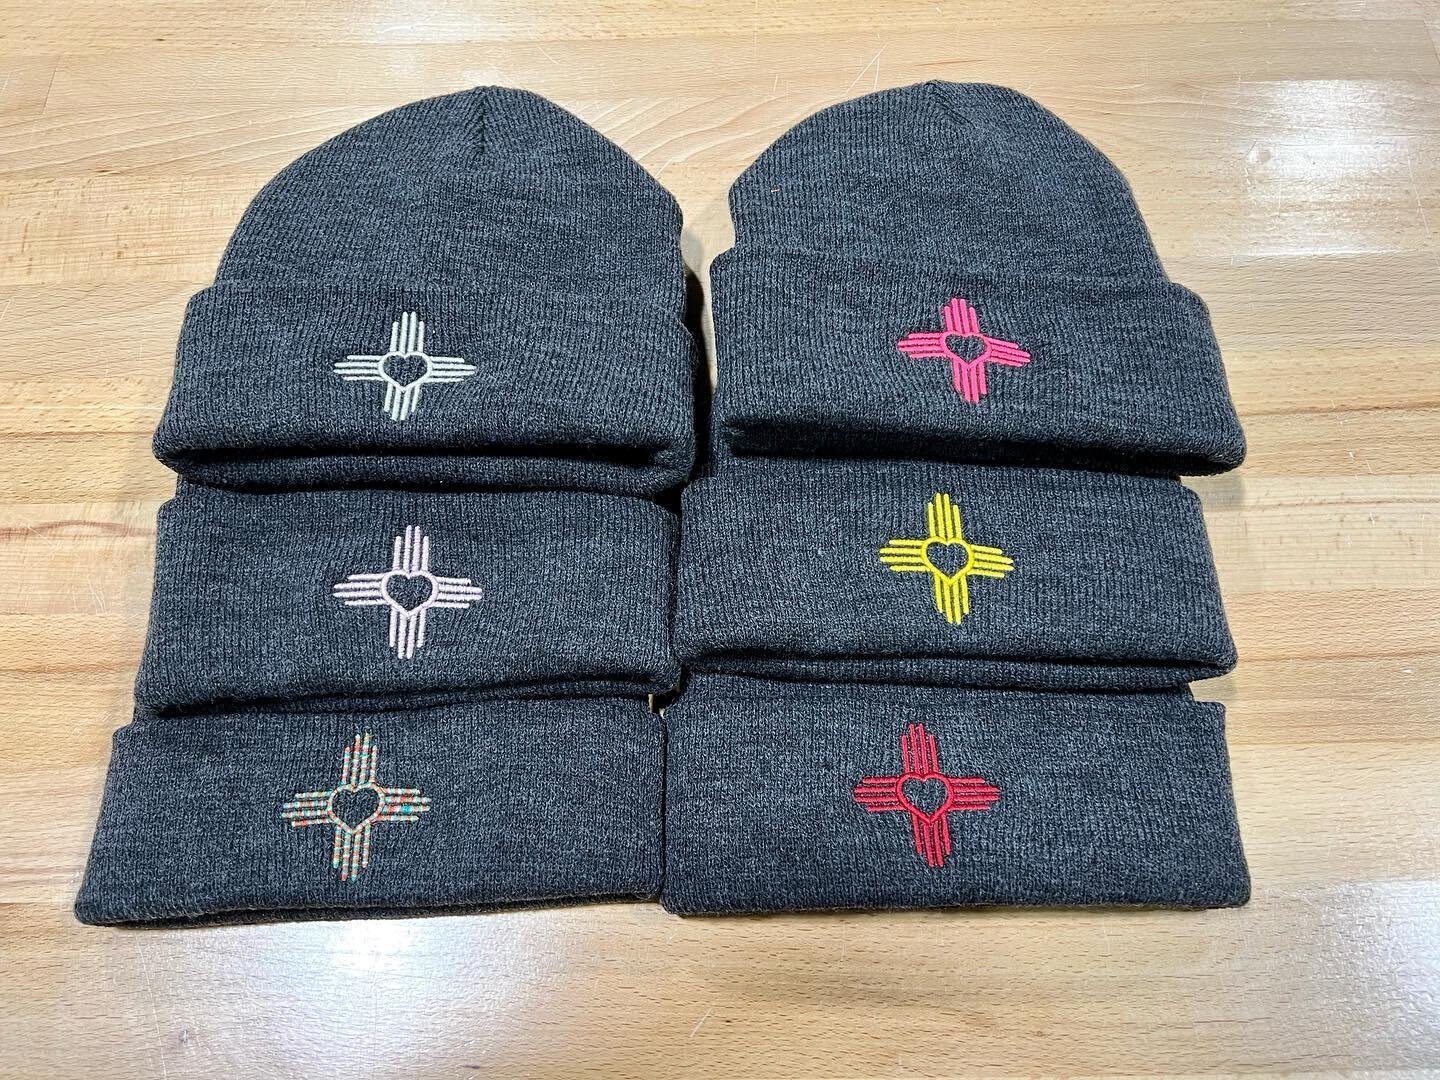 Happy Valentine&rsquo;s Day!

New embroidered beanies in the shop for all the Zia lovers.